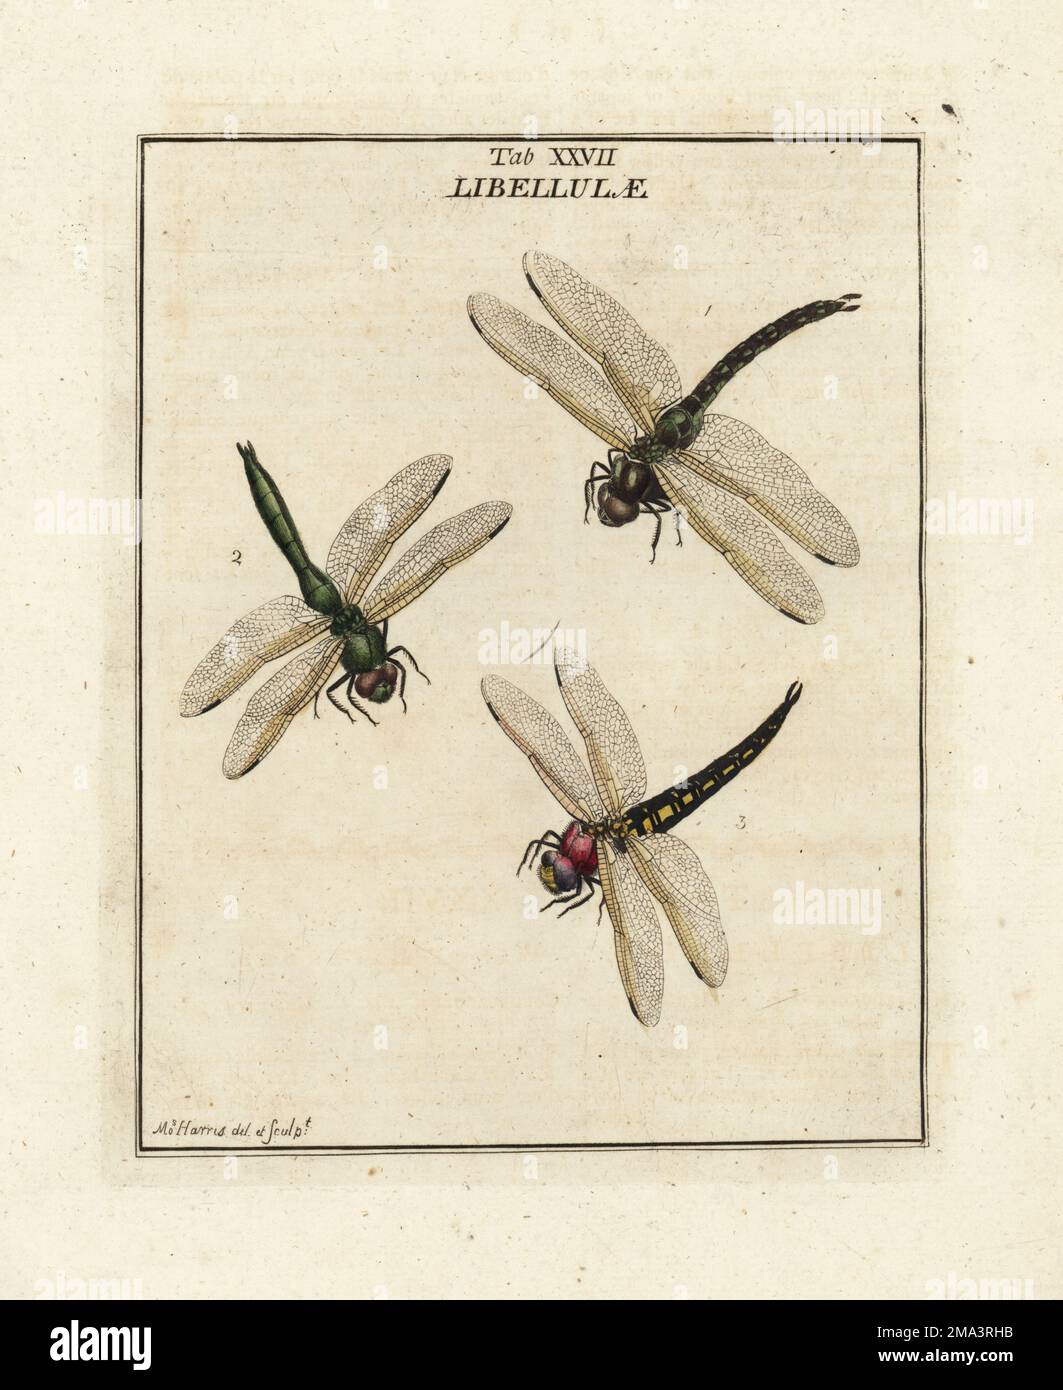 Migrant hawker, Aeshna mixta 1, downy emerald, Cordulia aenea 2, hairy dragonfly, Brachytron pratense, female 3. As Libellula coluberculus, Libellula aenea, Libellula aspis. Handcoloured copperplate engraving drawn and engraved by Moses Harris from his own Exposition of English Insects, Including the several Classes of Neuroptera, Hymenoptera, Diptera, or Bees, Flies and Libellulae, White and Robson, London, 1782. Stock Photo